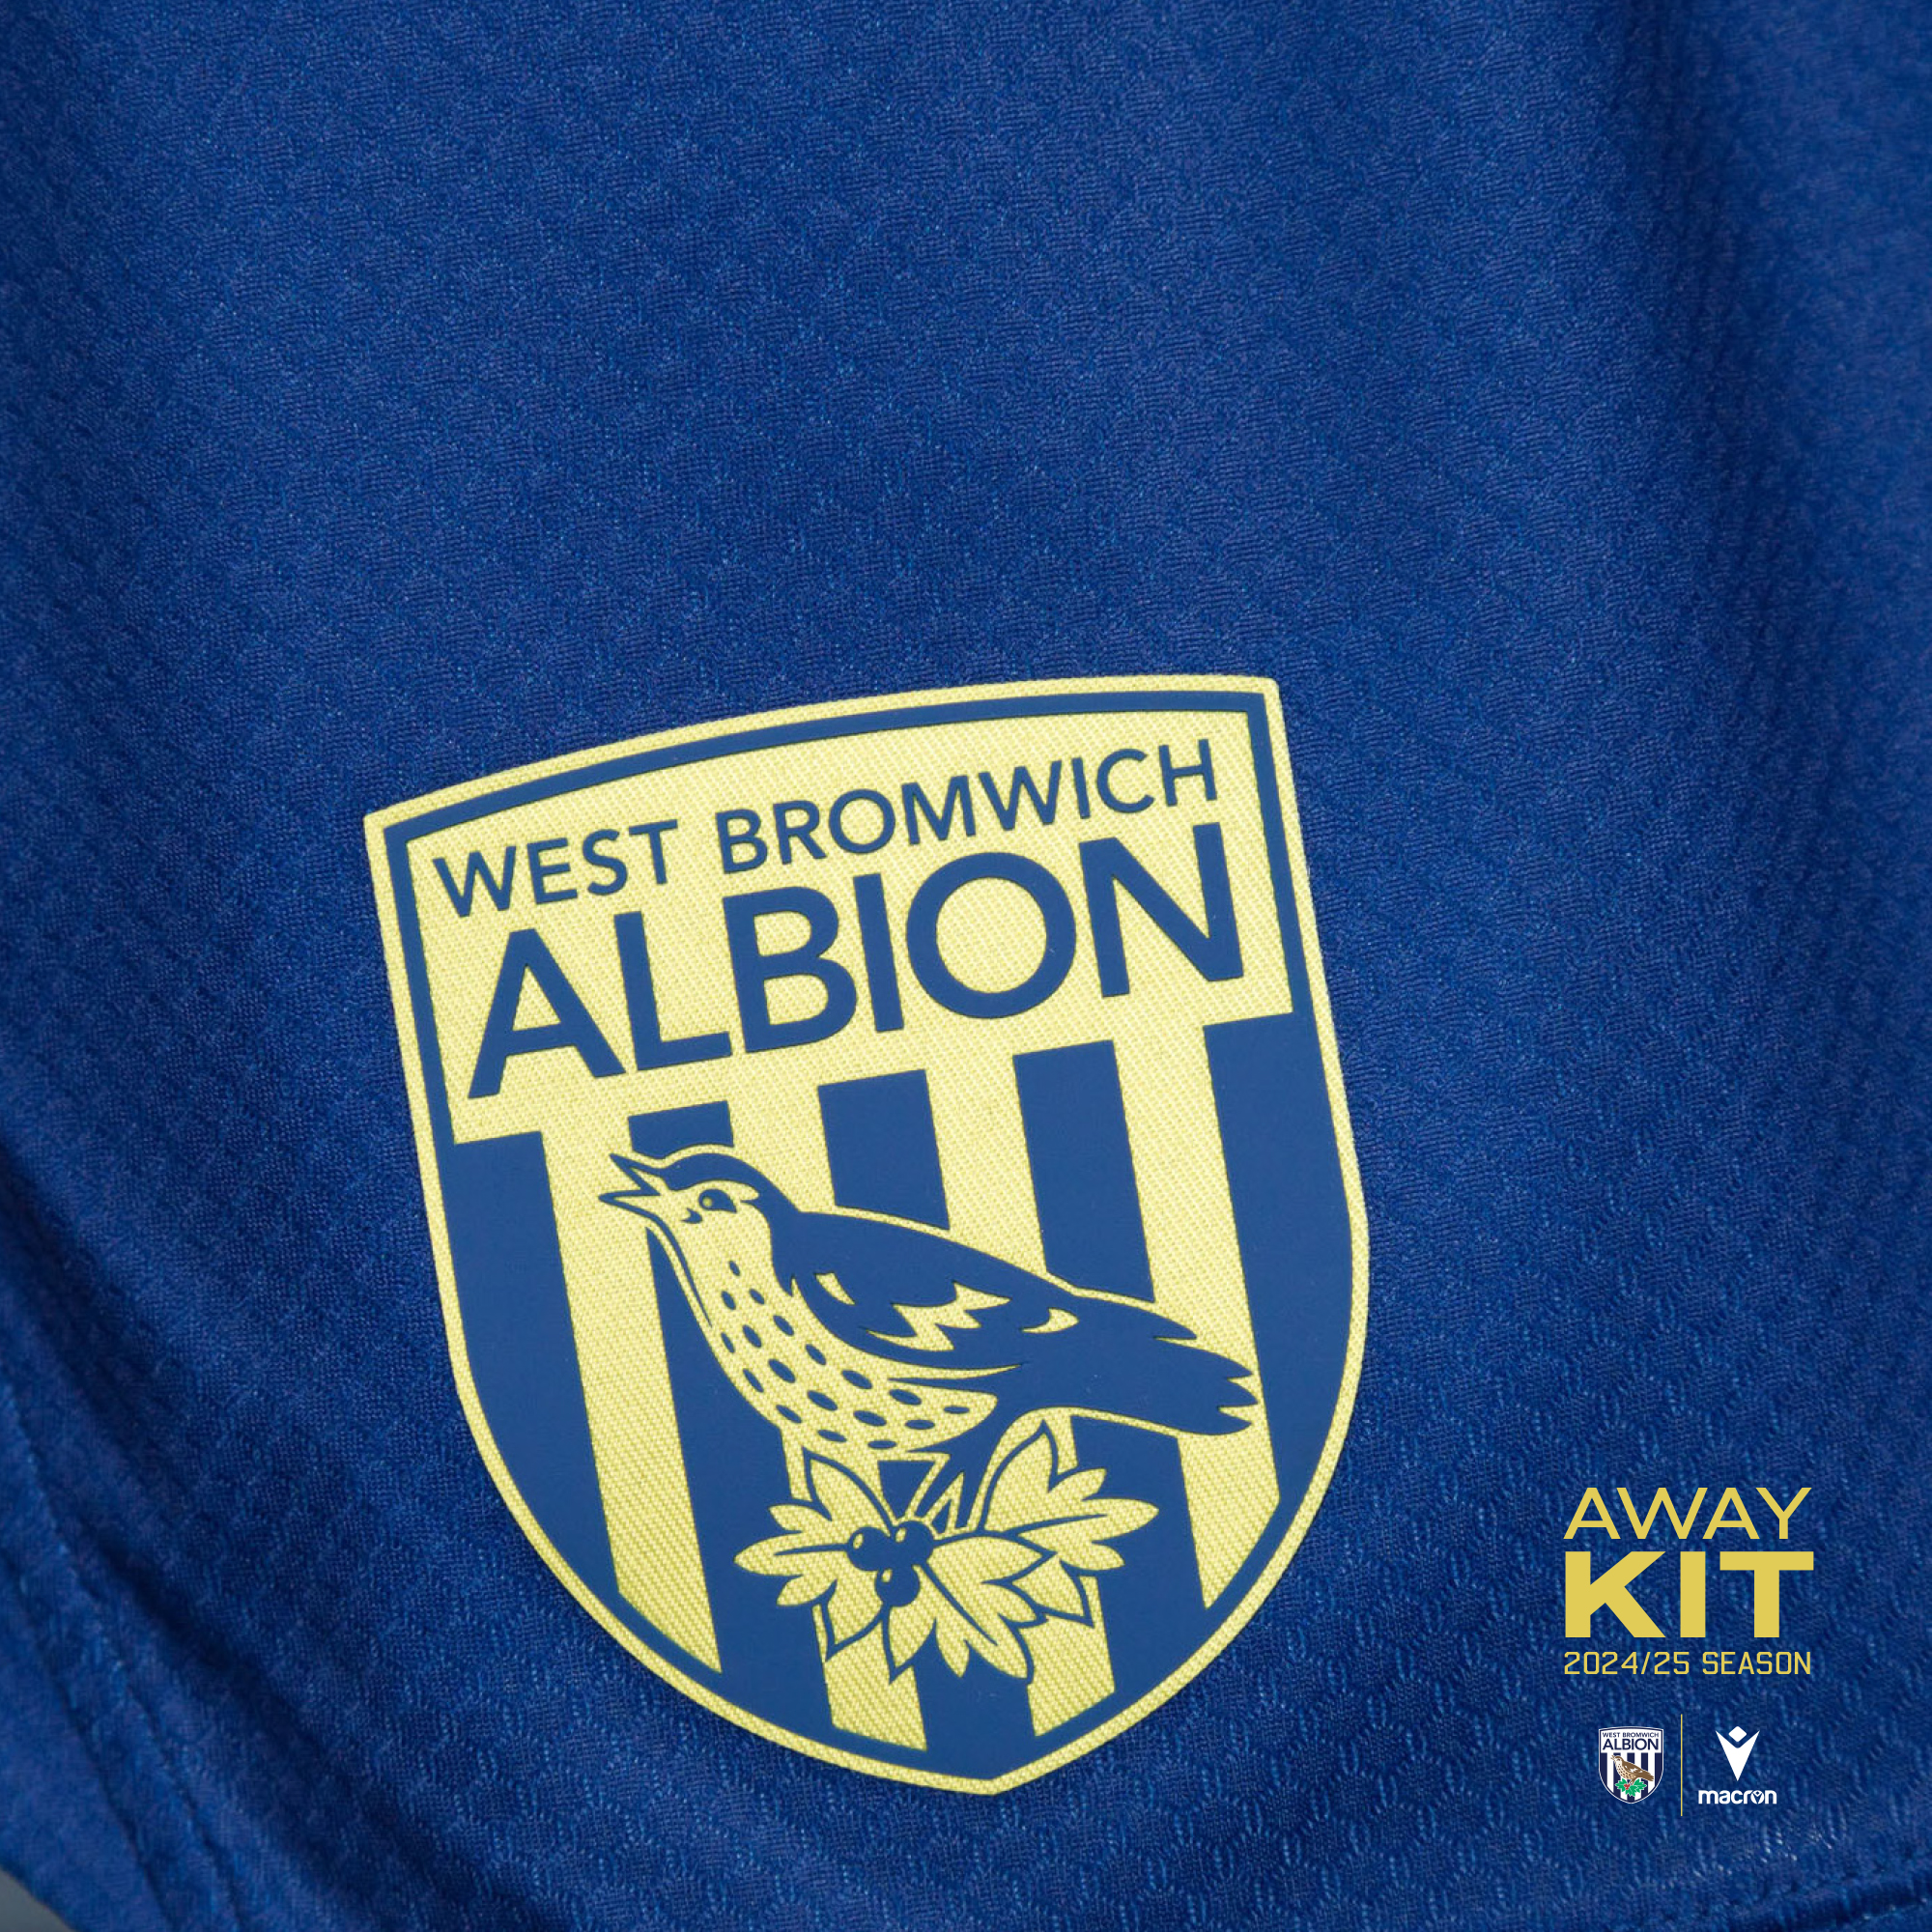 A close-up image of the 2024/25 away kit 